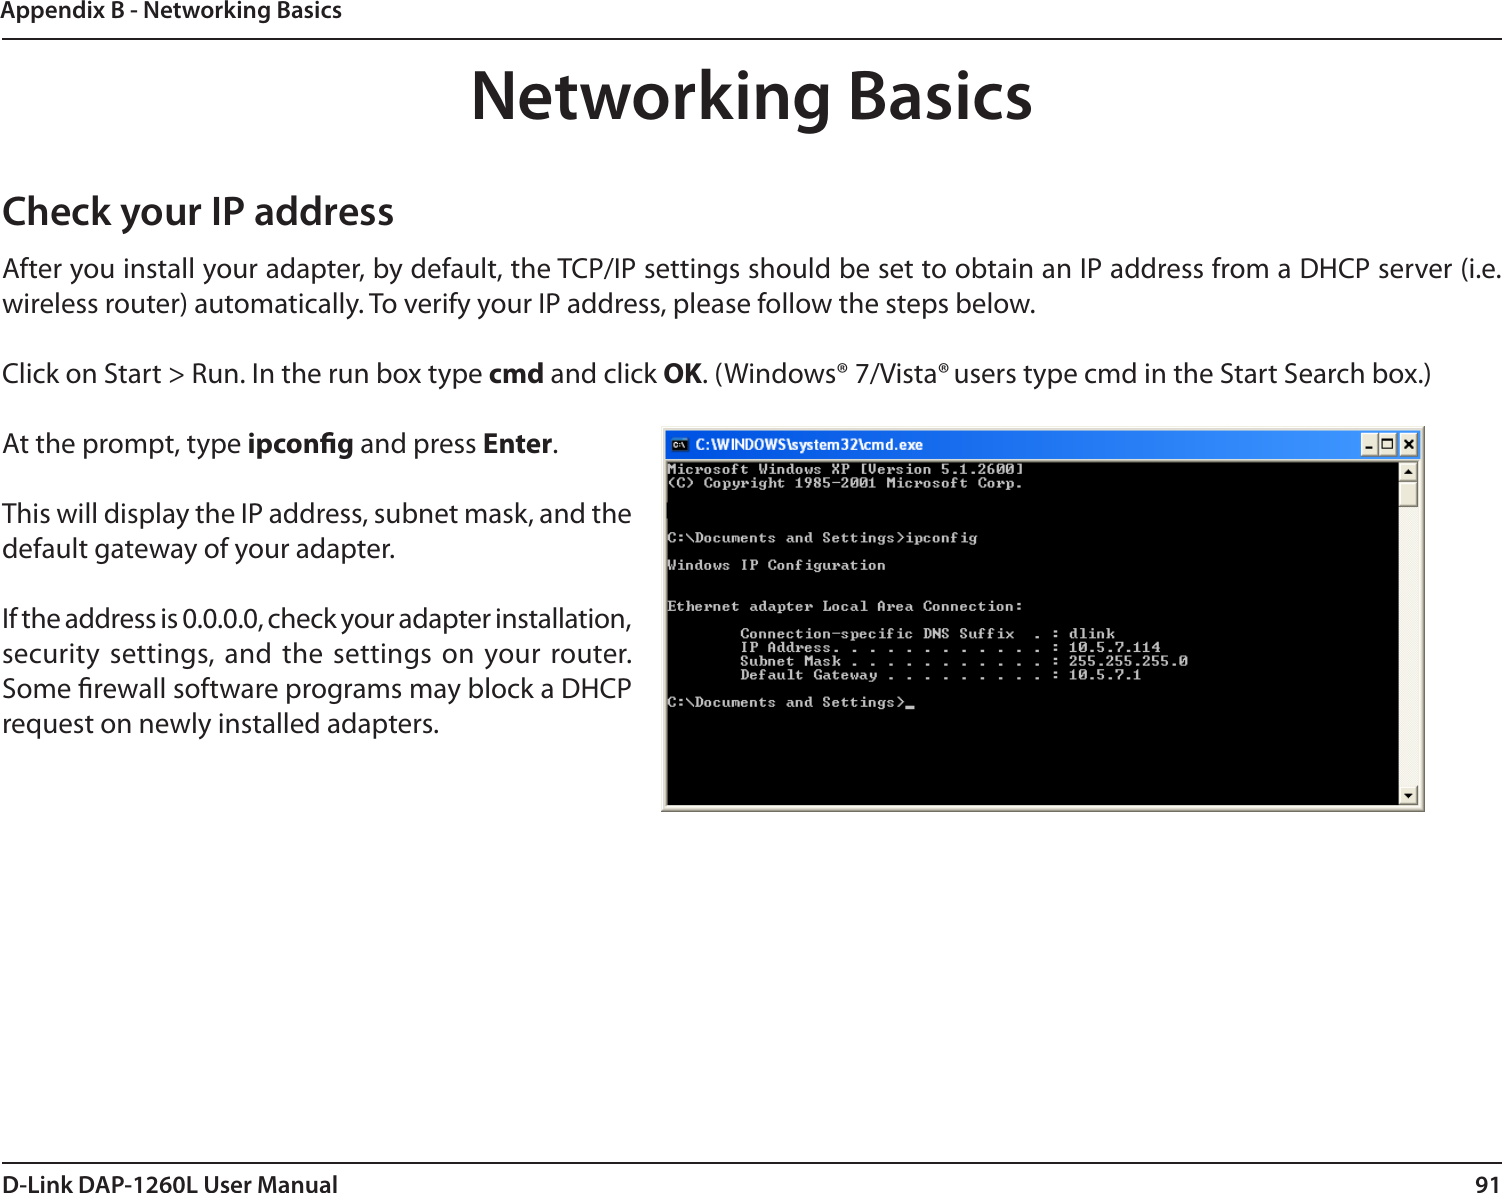 91D-Link DAP-1260L User ManualAppendix B - Networking BasicsNetworking BasicsCheck your IP addressAfter you install your adapter, by default, the TCP/IP settings should be set to obtain an IP address from a DHCP server (i.e. wireless router) automatically. To verify your IP address, please follow the steps below.Click on Start &gt; Run. In the run box type cmd and click OK. (Windows® 7/Vista® users type cmd in the Start Search box.)At the prompt, type ipcong and press Enter.This will display the IP address, subnet mask, and the default gateway of your adapter.If the address is 0.0.0.0, check your adapter installation, security  settings, and the  settings on your router. Some rewall software programs may block a DHCP request on newly installed adapters. 